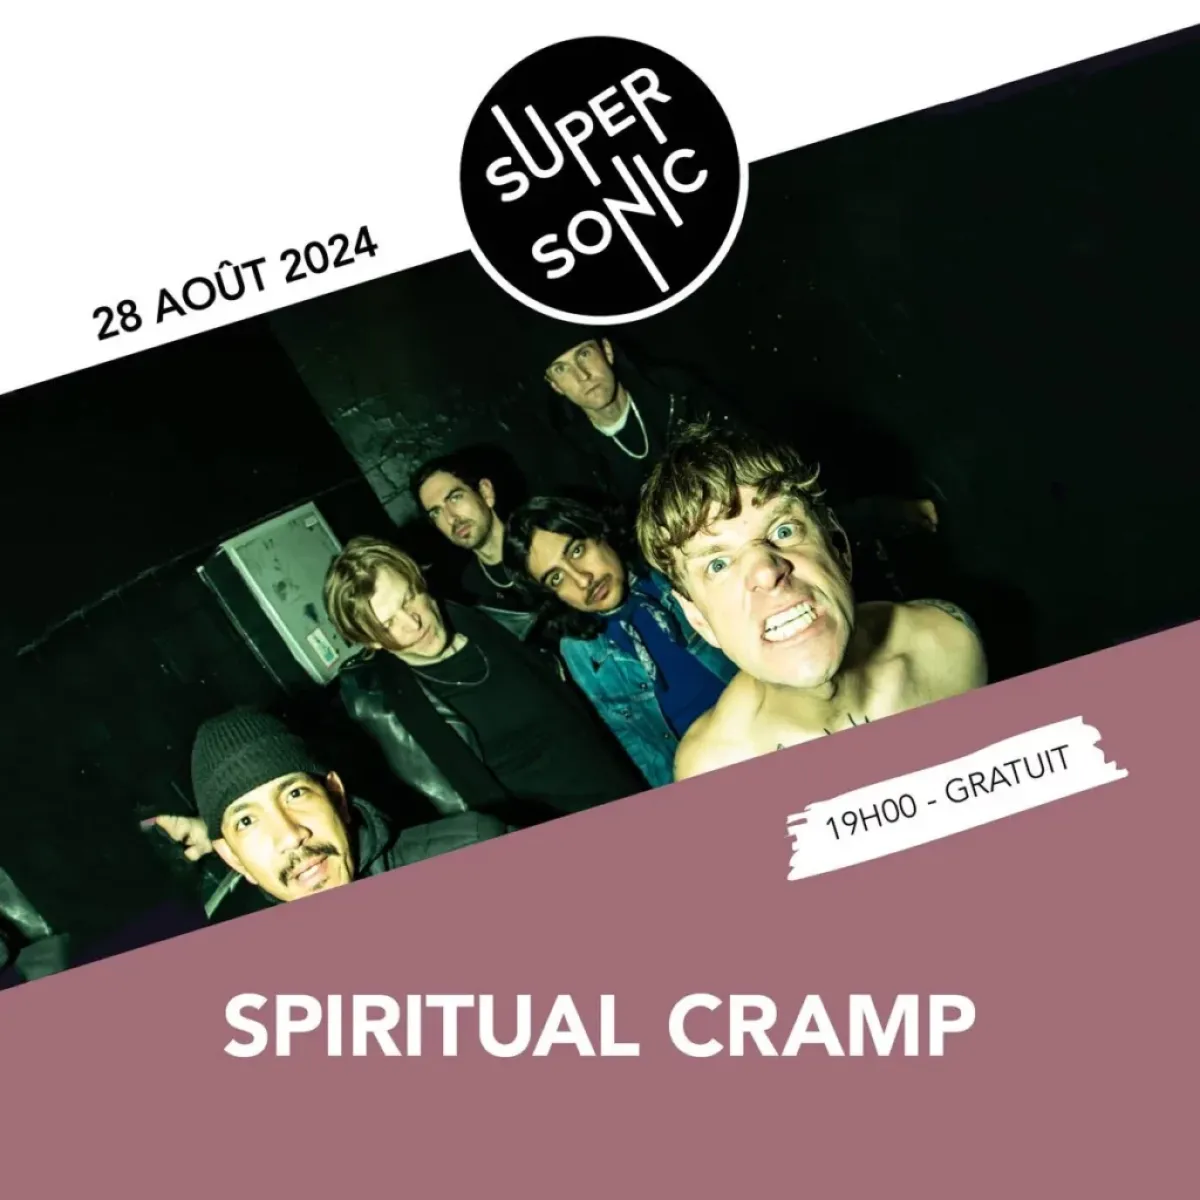 Spiritual Cramp at Supersonic Records Tickets